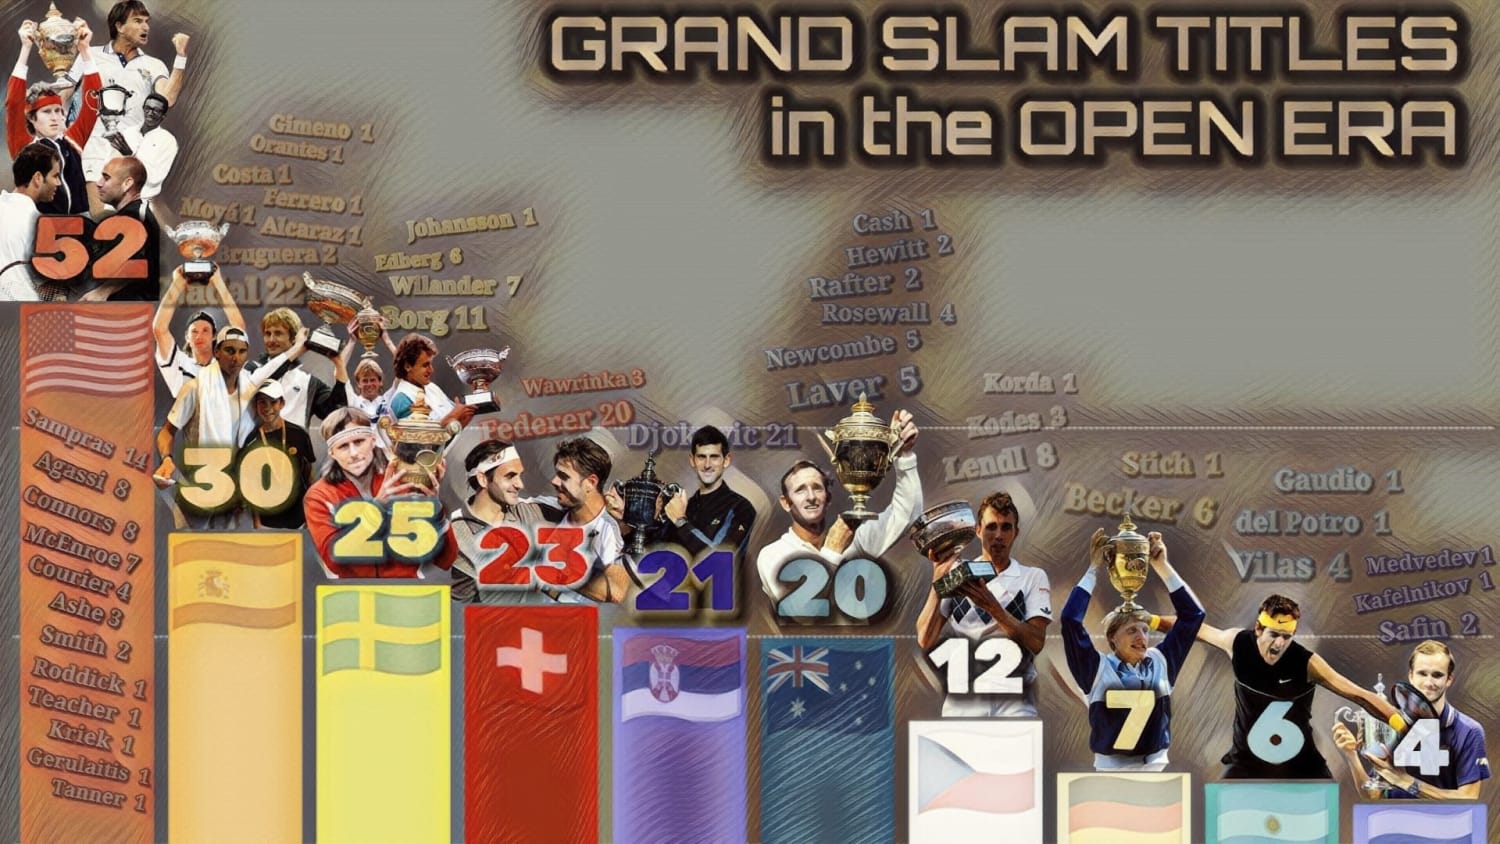 Alcaraz's US Open title was the 30th Grand Slam title won by a Spaniard in the Open Era